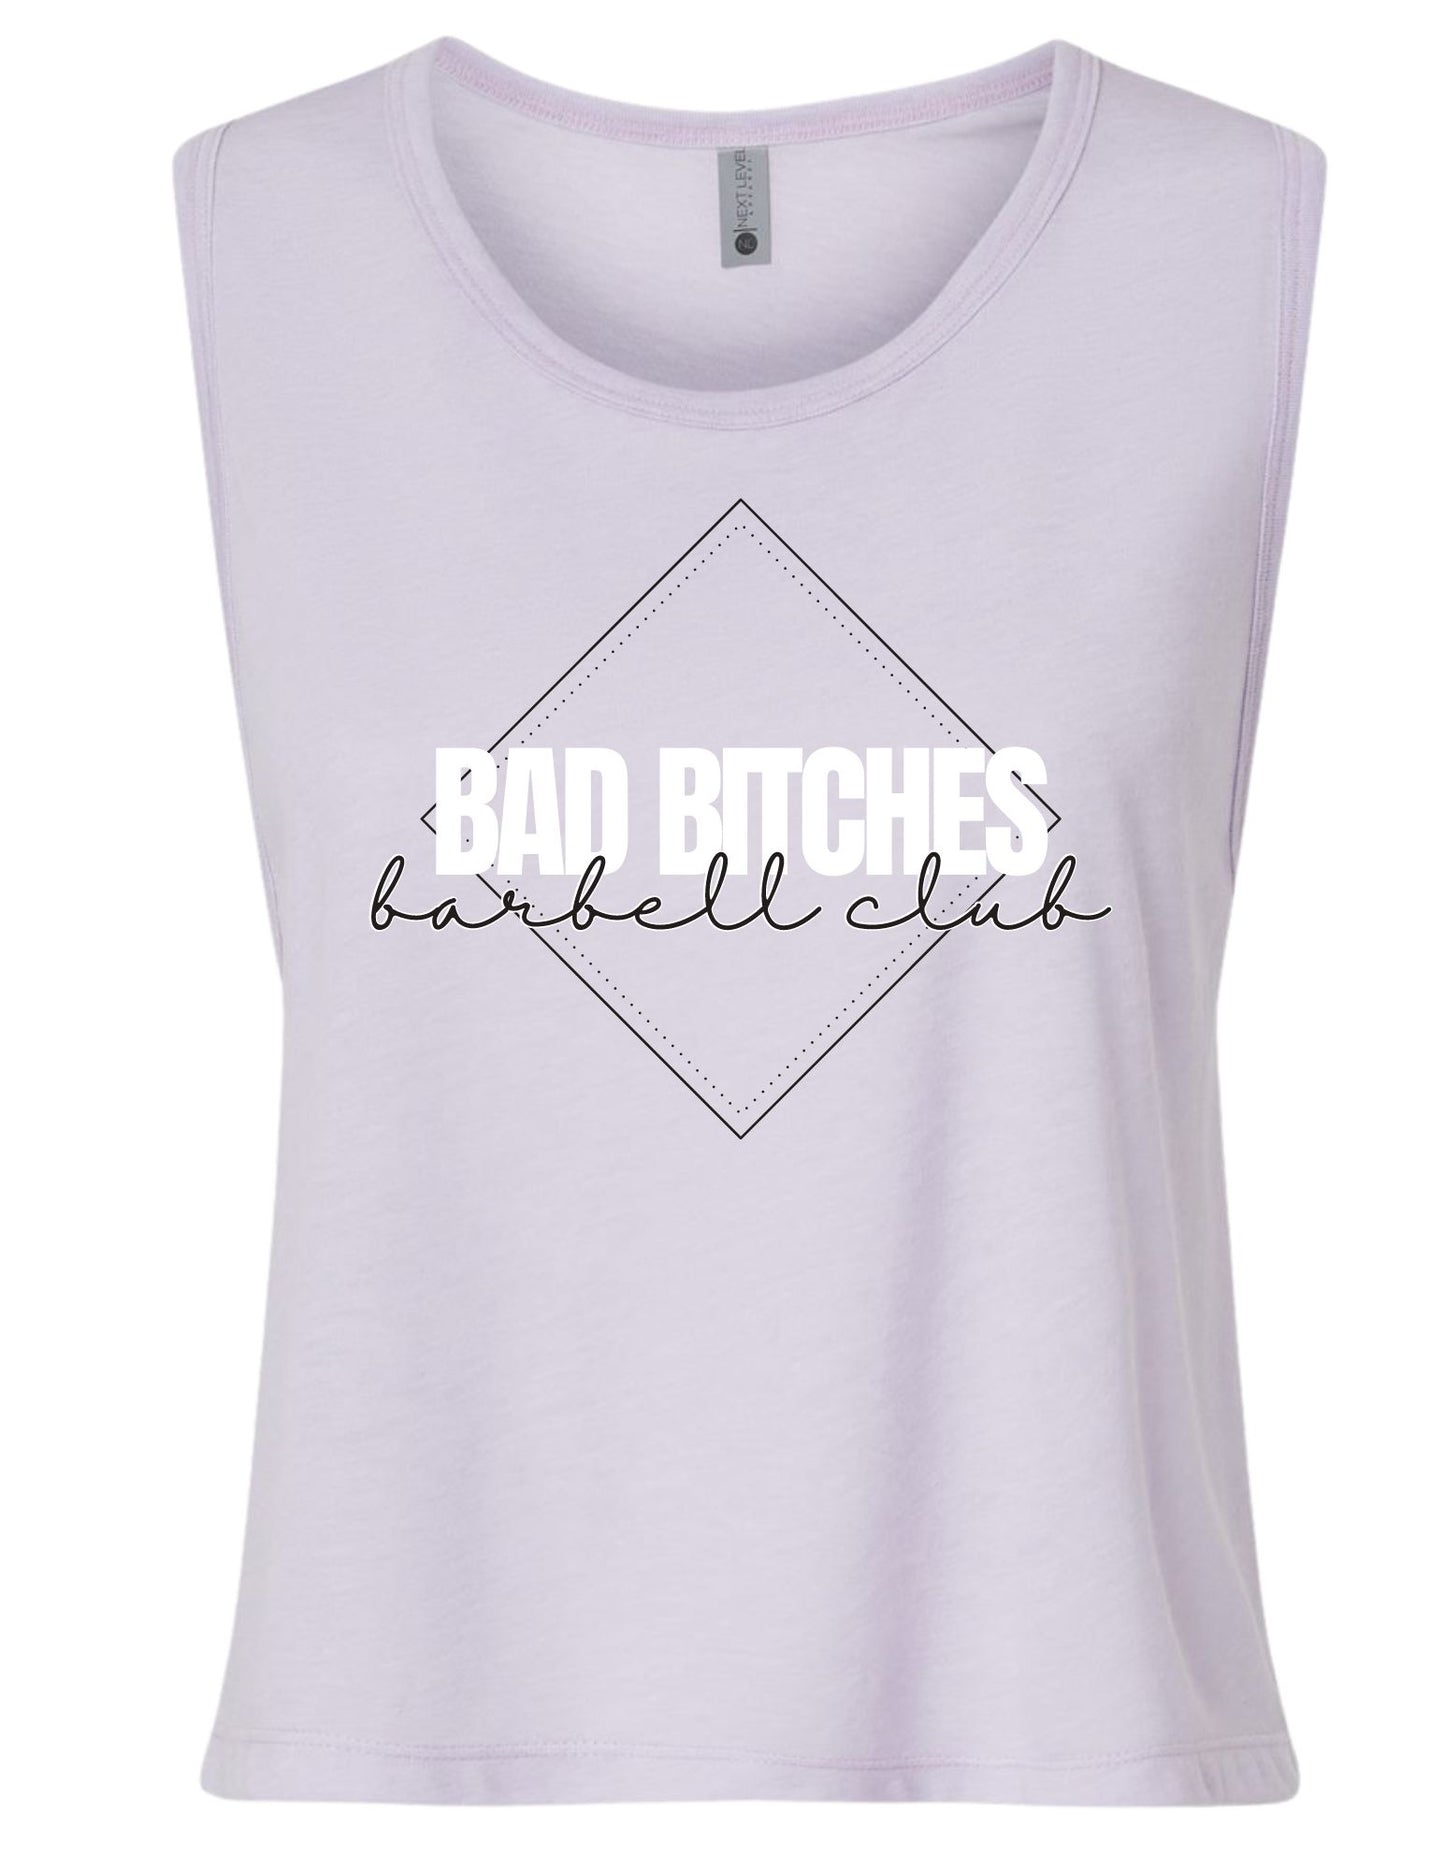 BAD BITCHES BARBELL CLUB CROPPED TANK